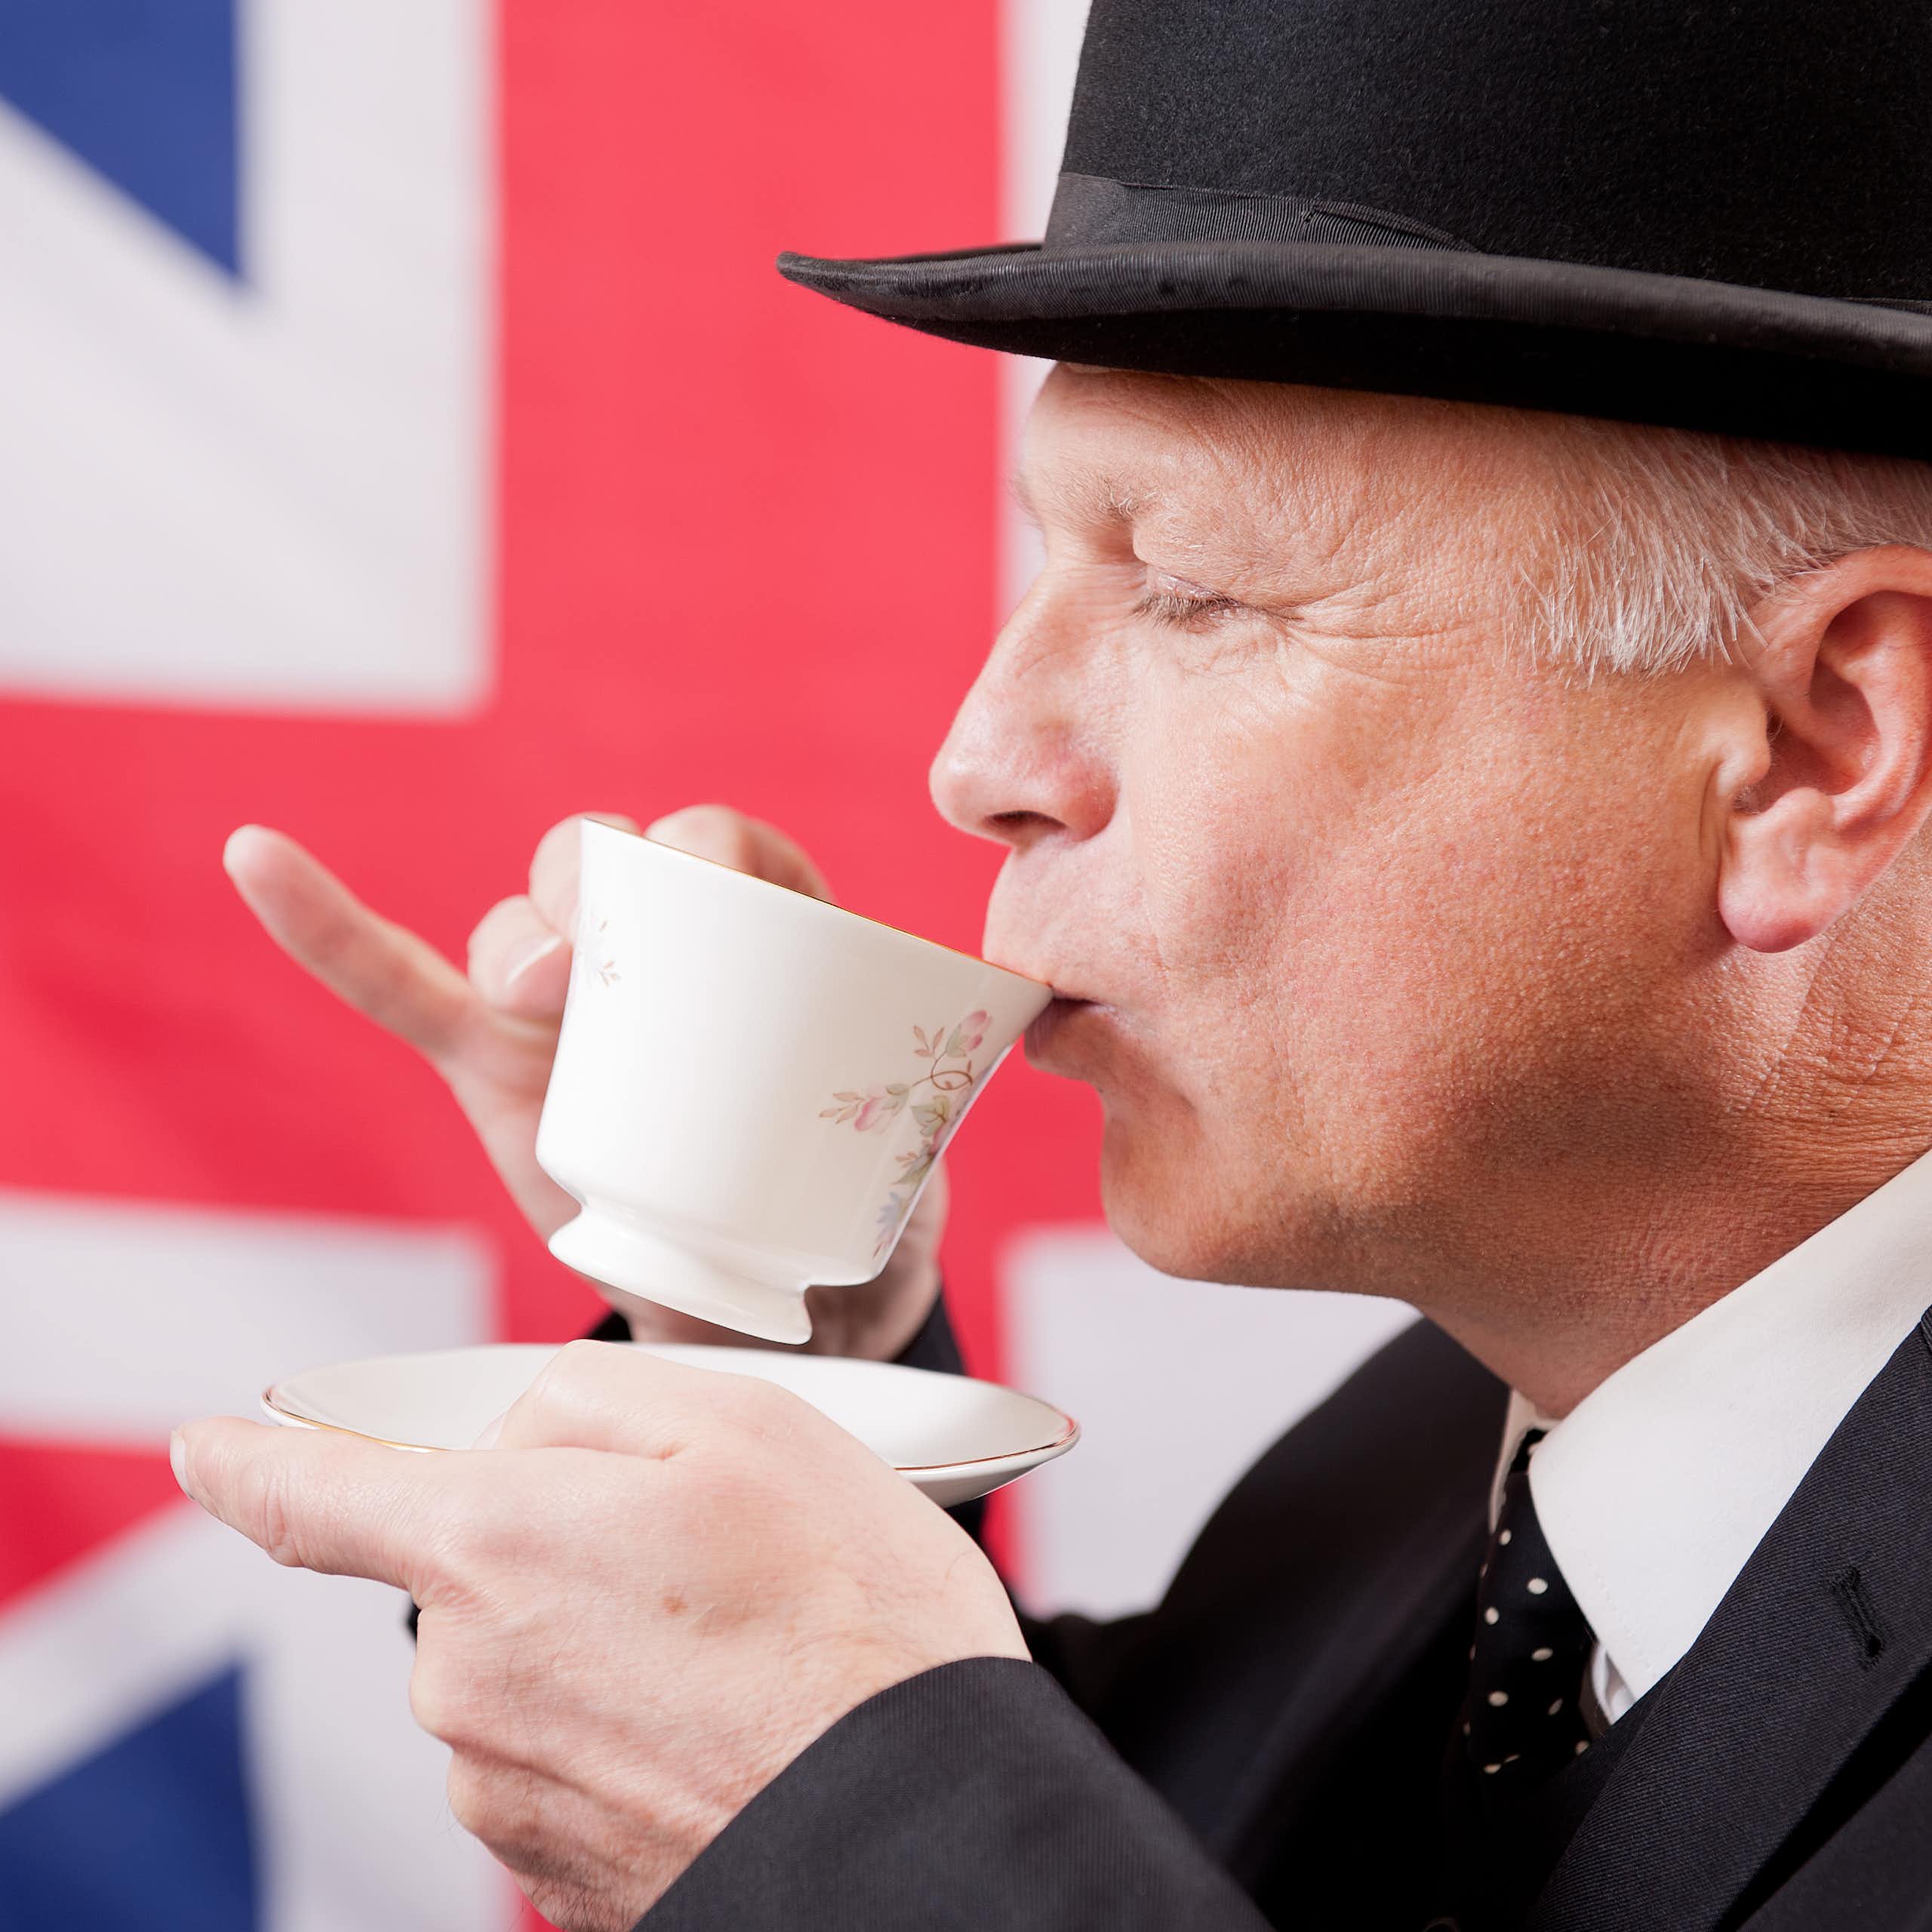 View of a well-dressed man sipping a cup of tea in front of a union jack flag